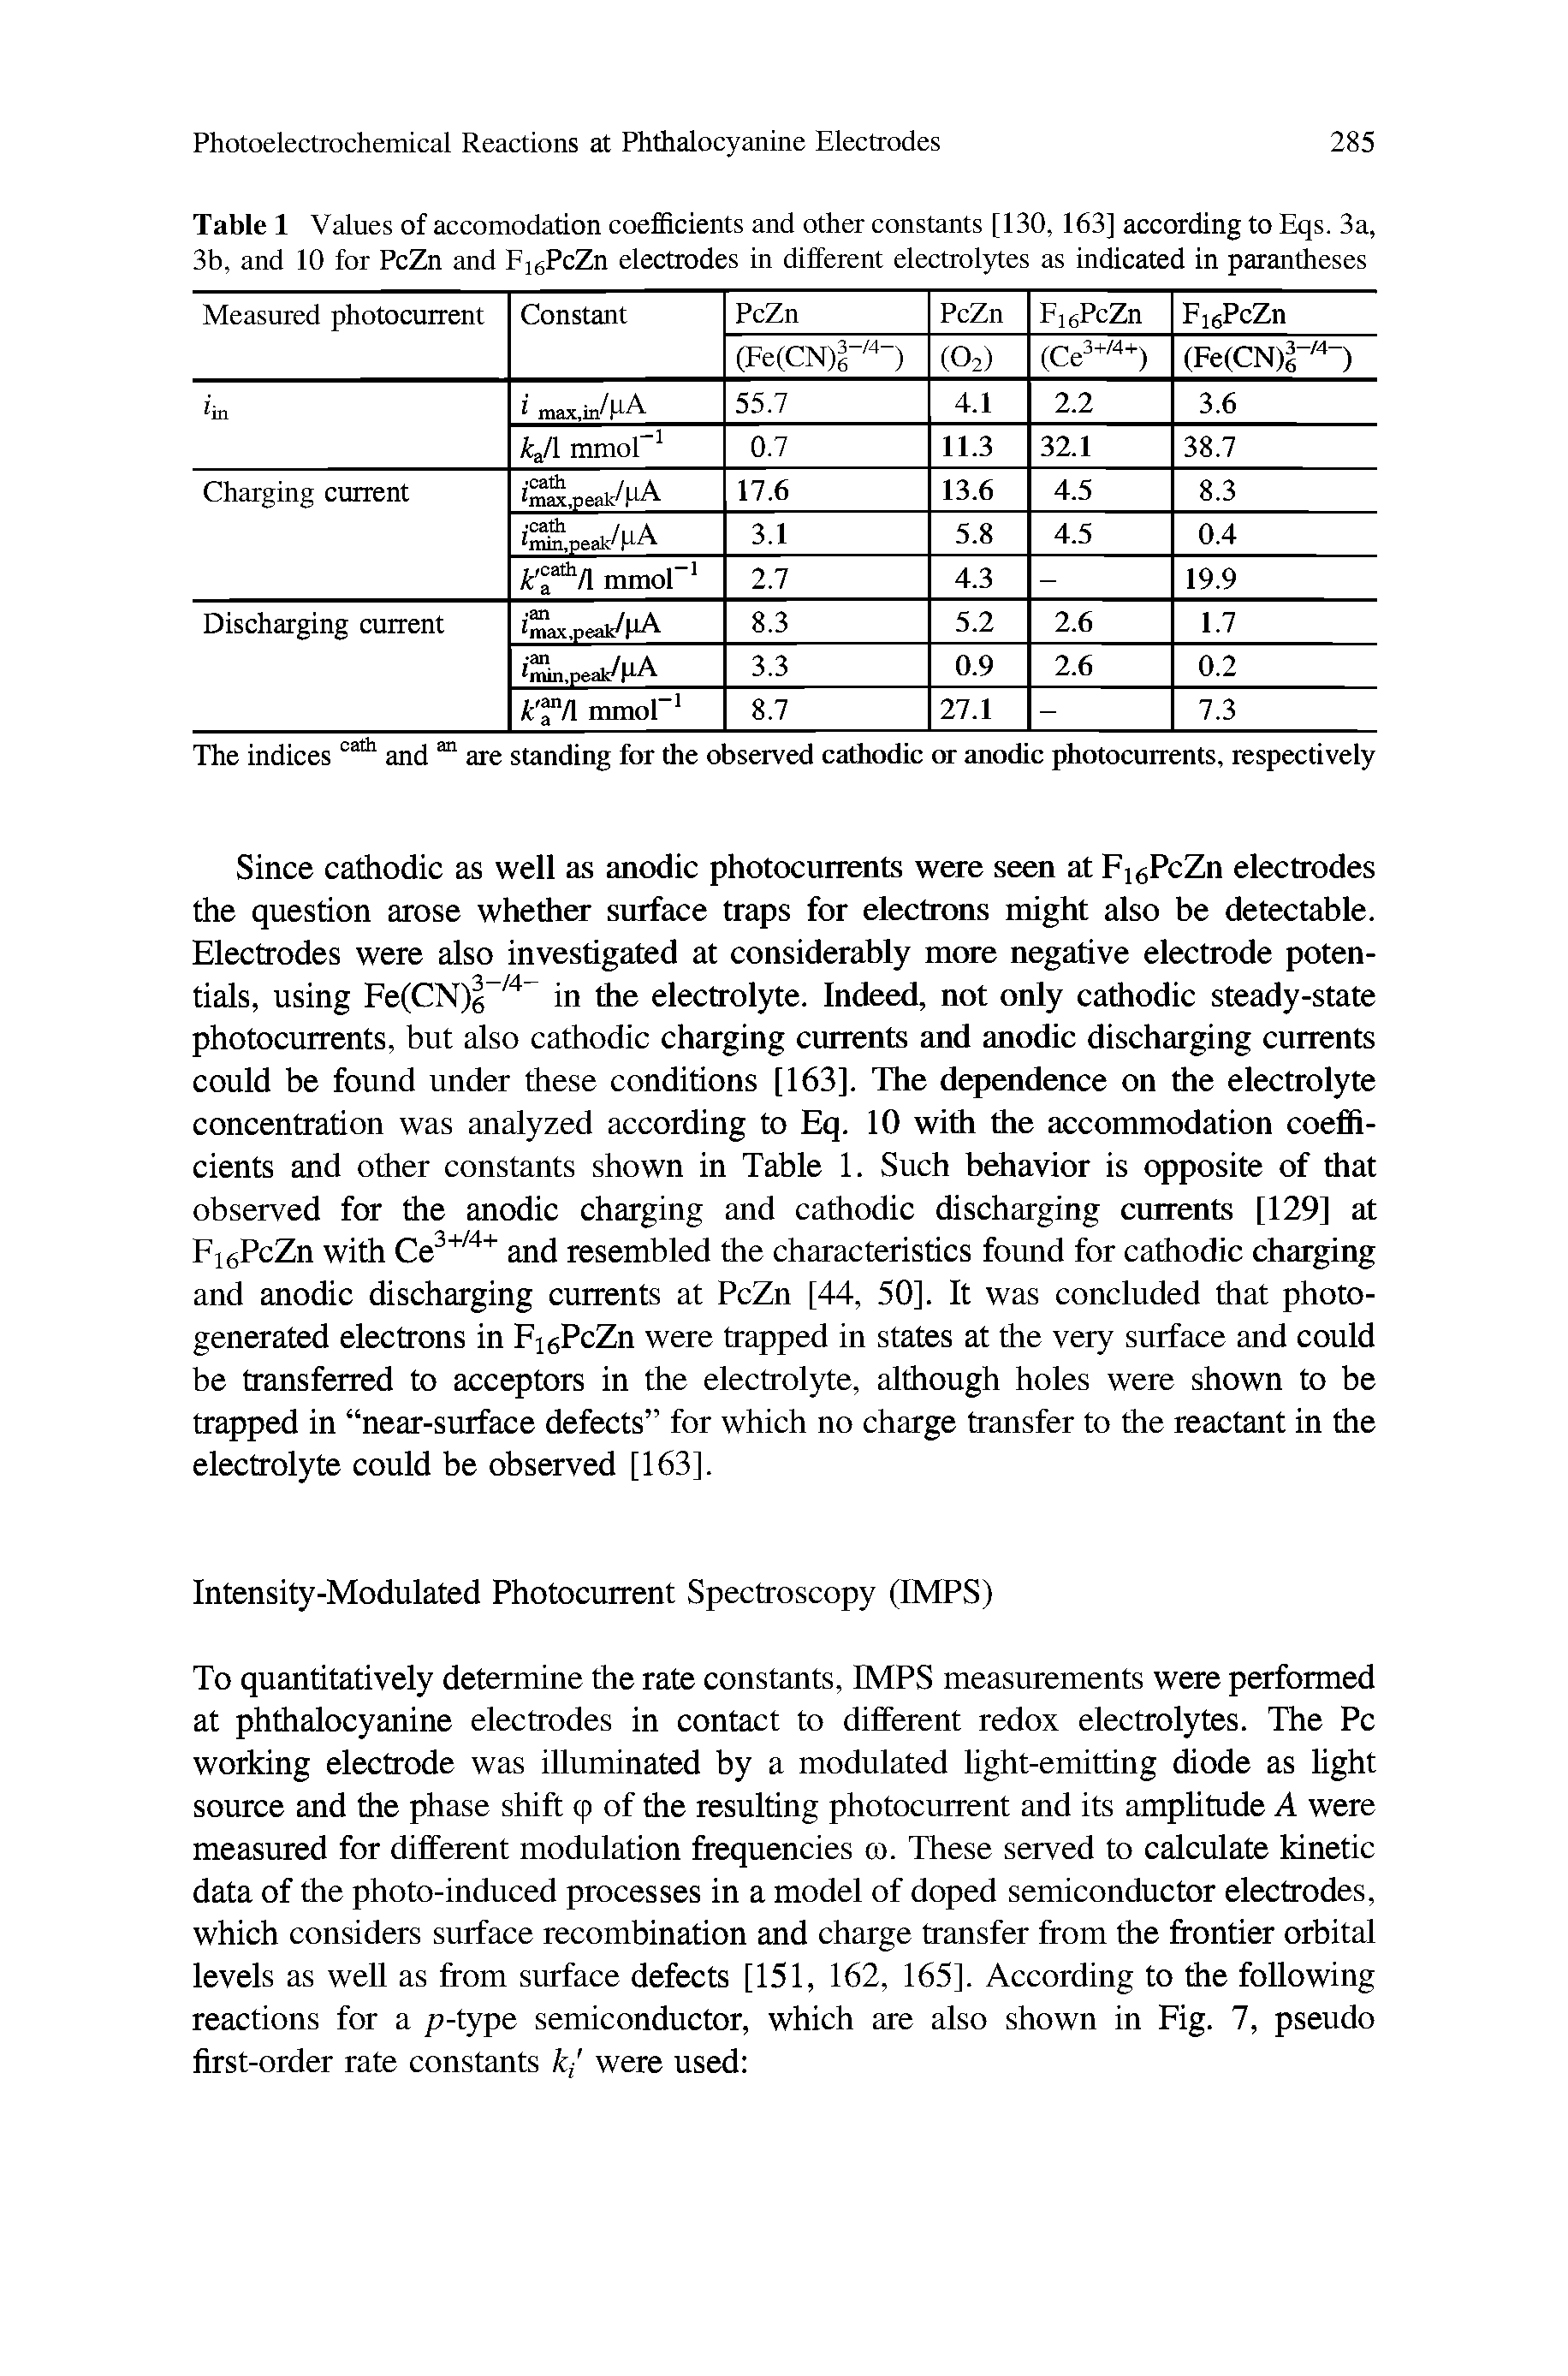 Table 1 Values of accomodation coefficients and other constants [130, 163] according to Eqs. 3a, 3b, and 10 for PcZn and Ei PcZn electrodes in different electrolytes as indicated in parantheses...